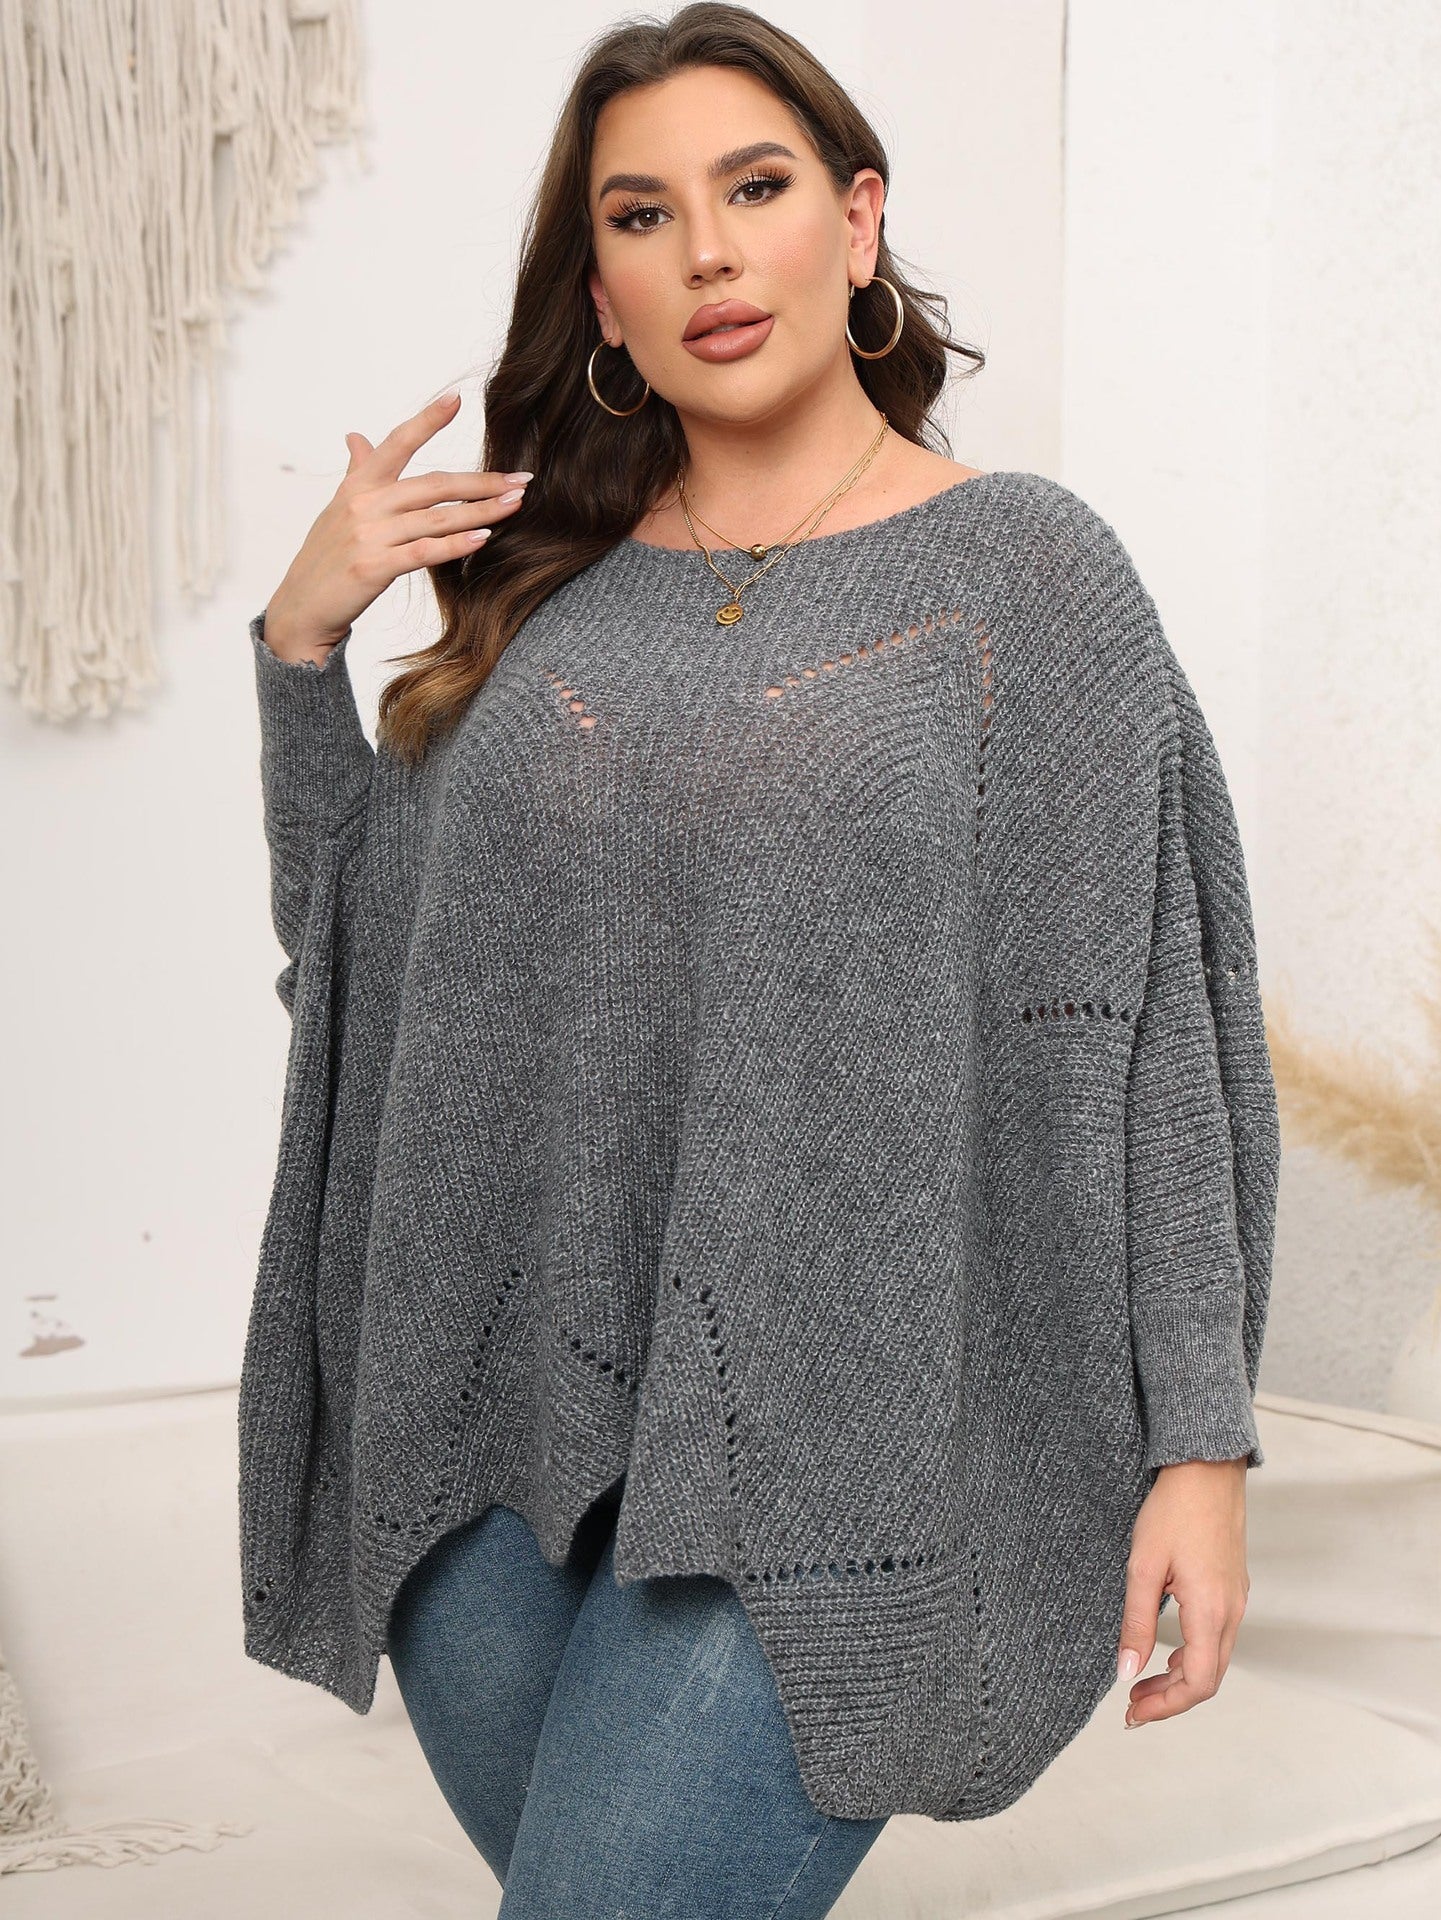 FZ Women's Plus Size Loose Woven Idle Pullover Top